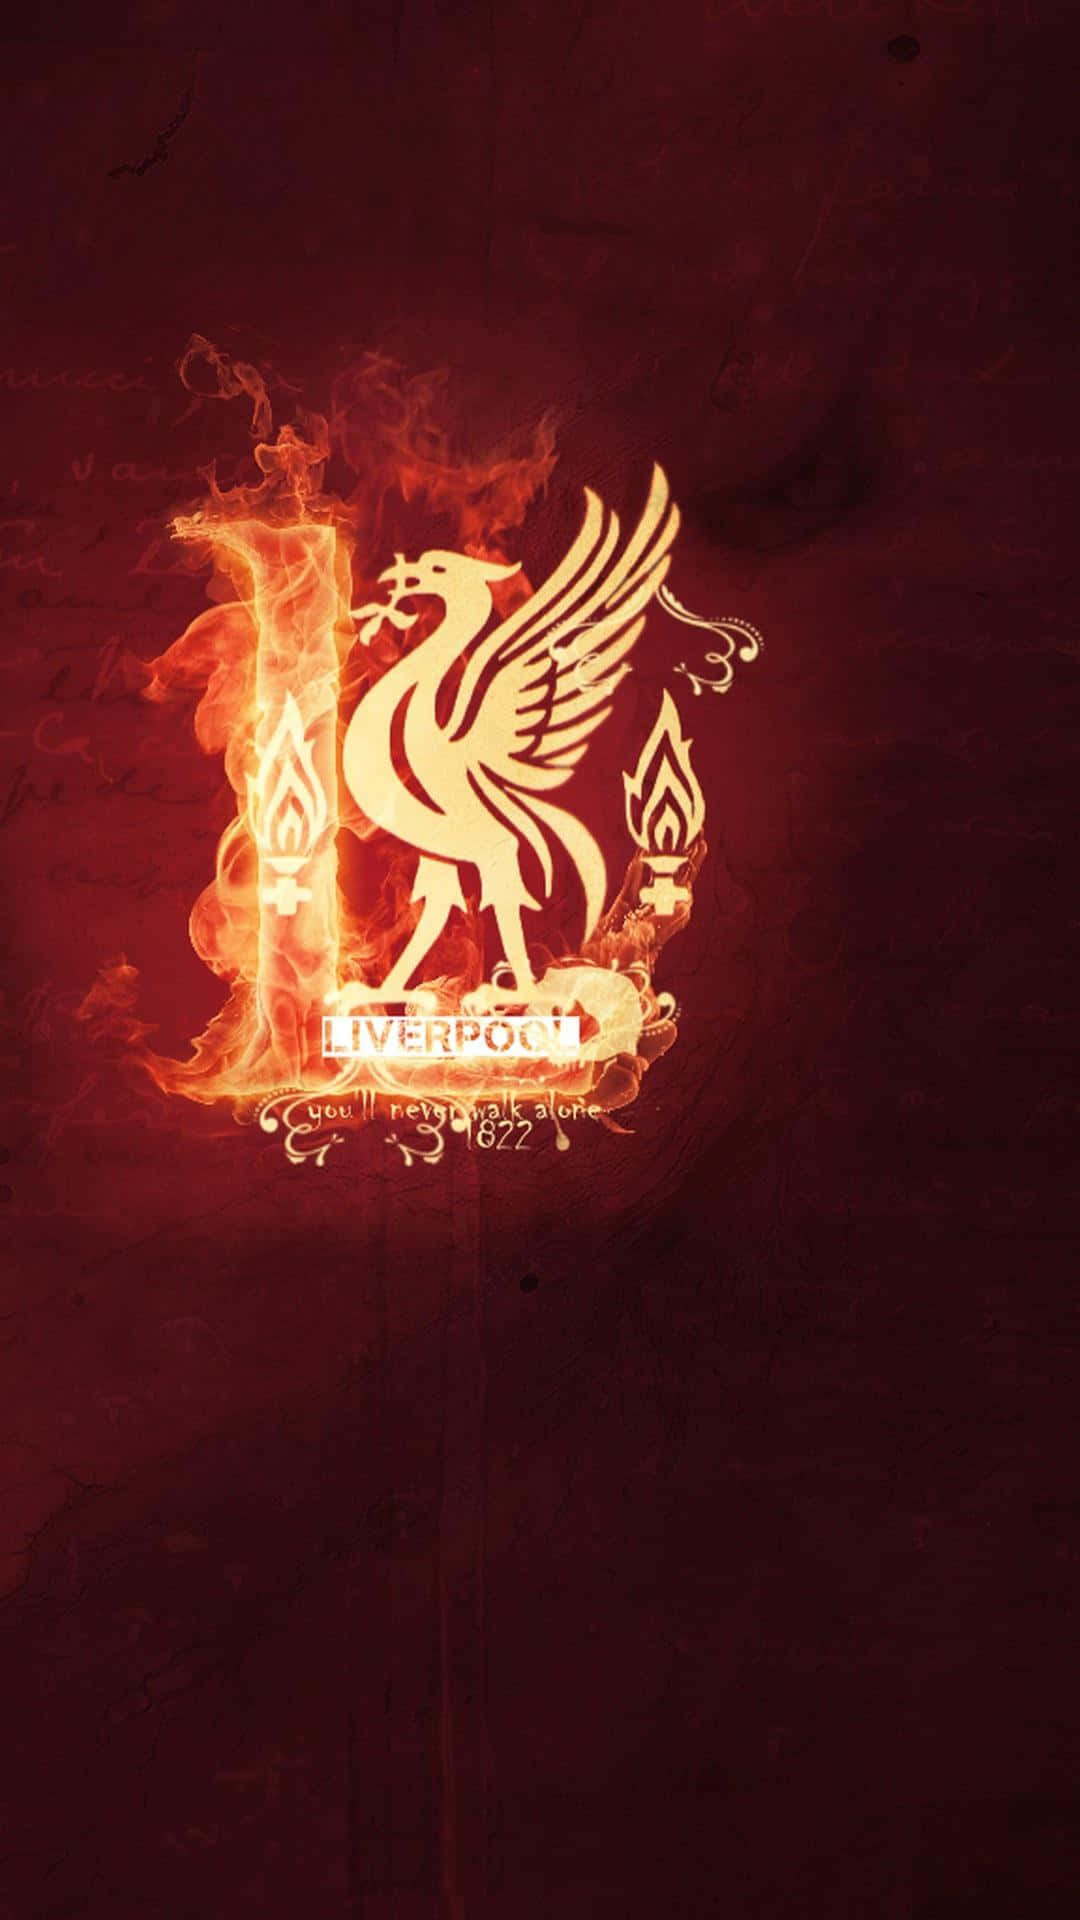 Stay in the know with the official Liverpool FC iPhone app Wallpaper